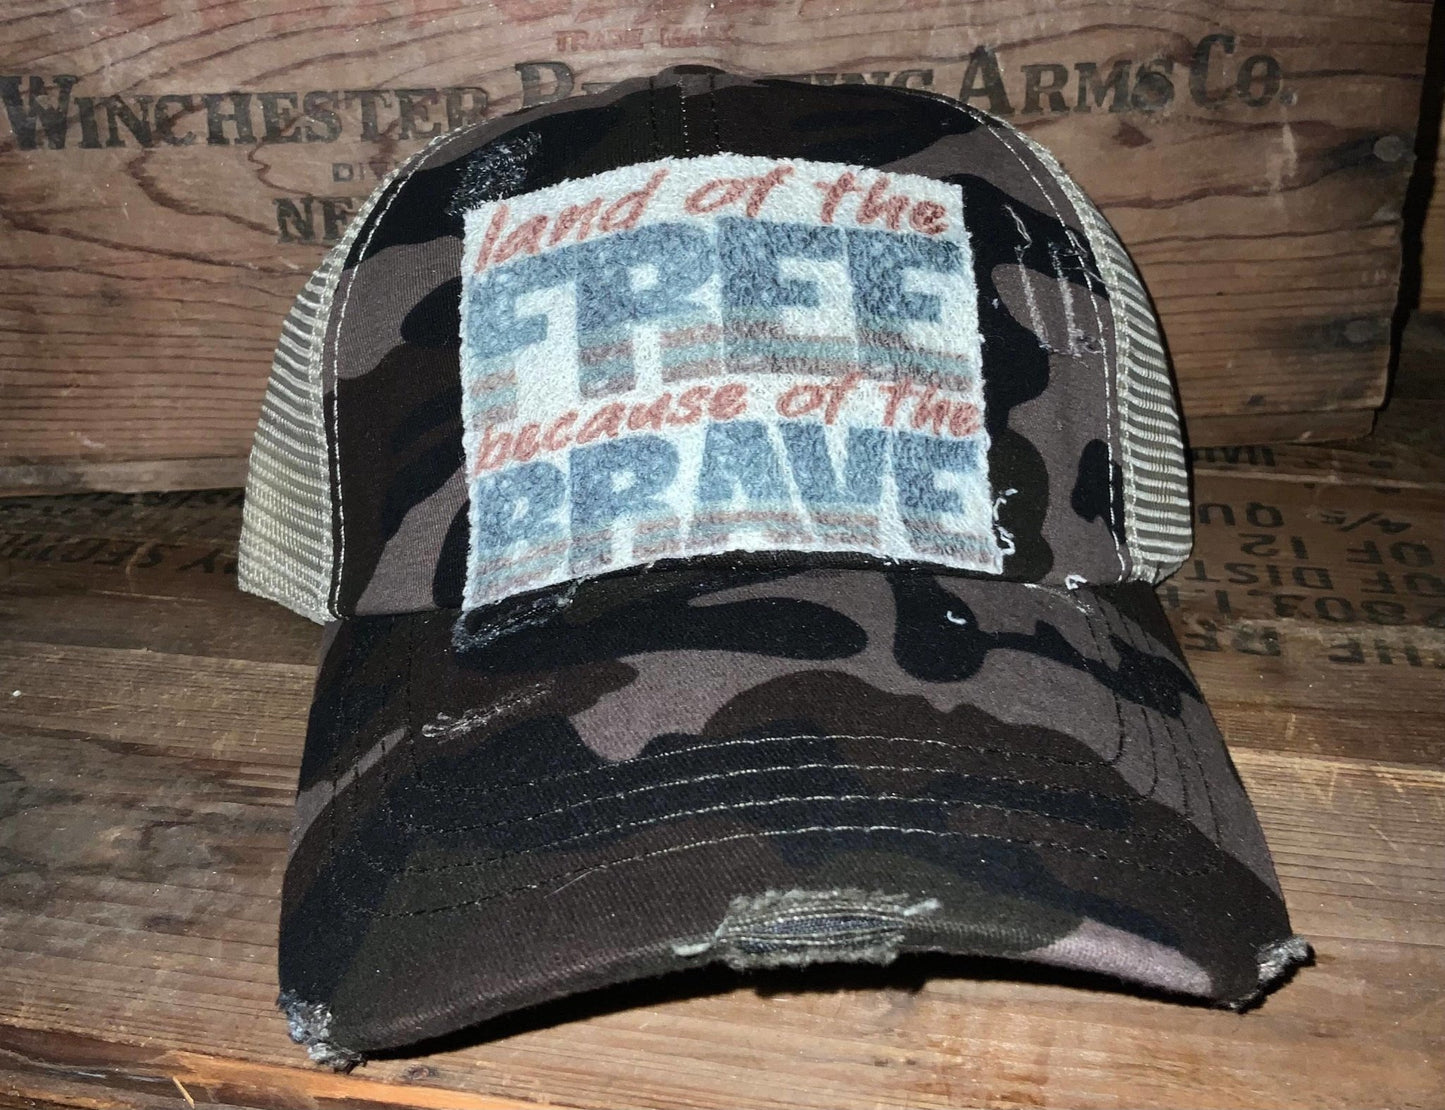 Land Of The Free - CountryFide Custom Accessories and Outdoors